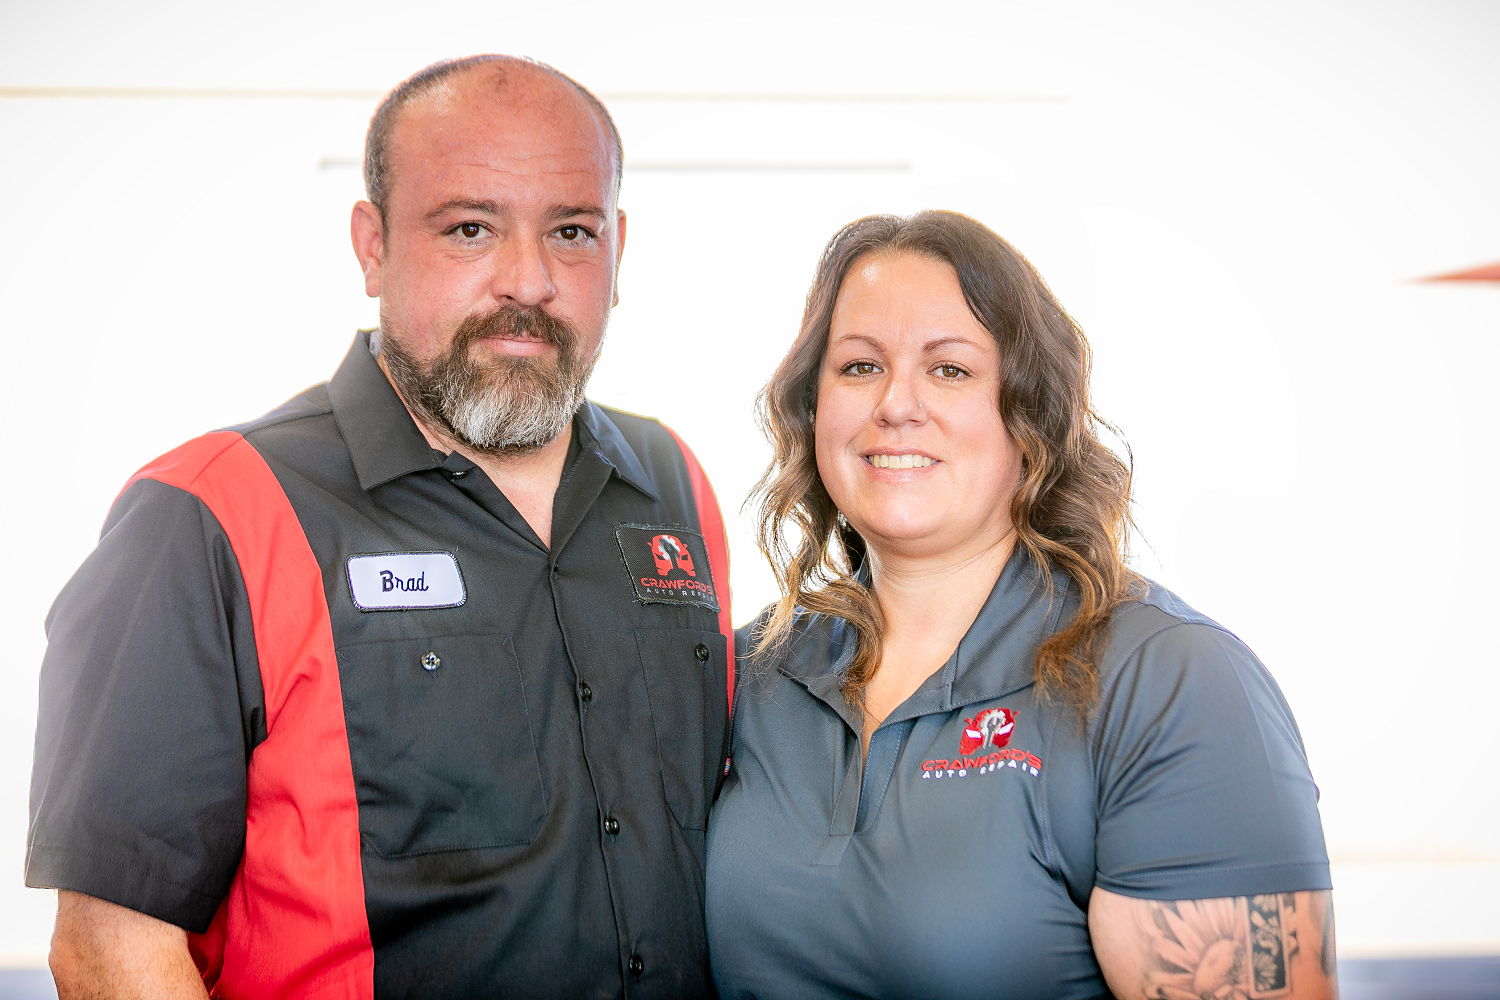 Crawford's Auto Repair Owners, Brad Weiss and Leann Weiss, Chandler, Gilbert, Sun Lakes, and nearby areas